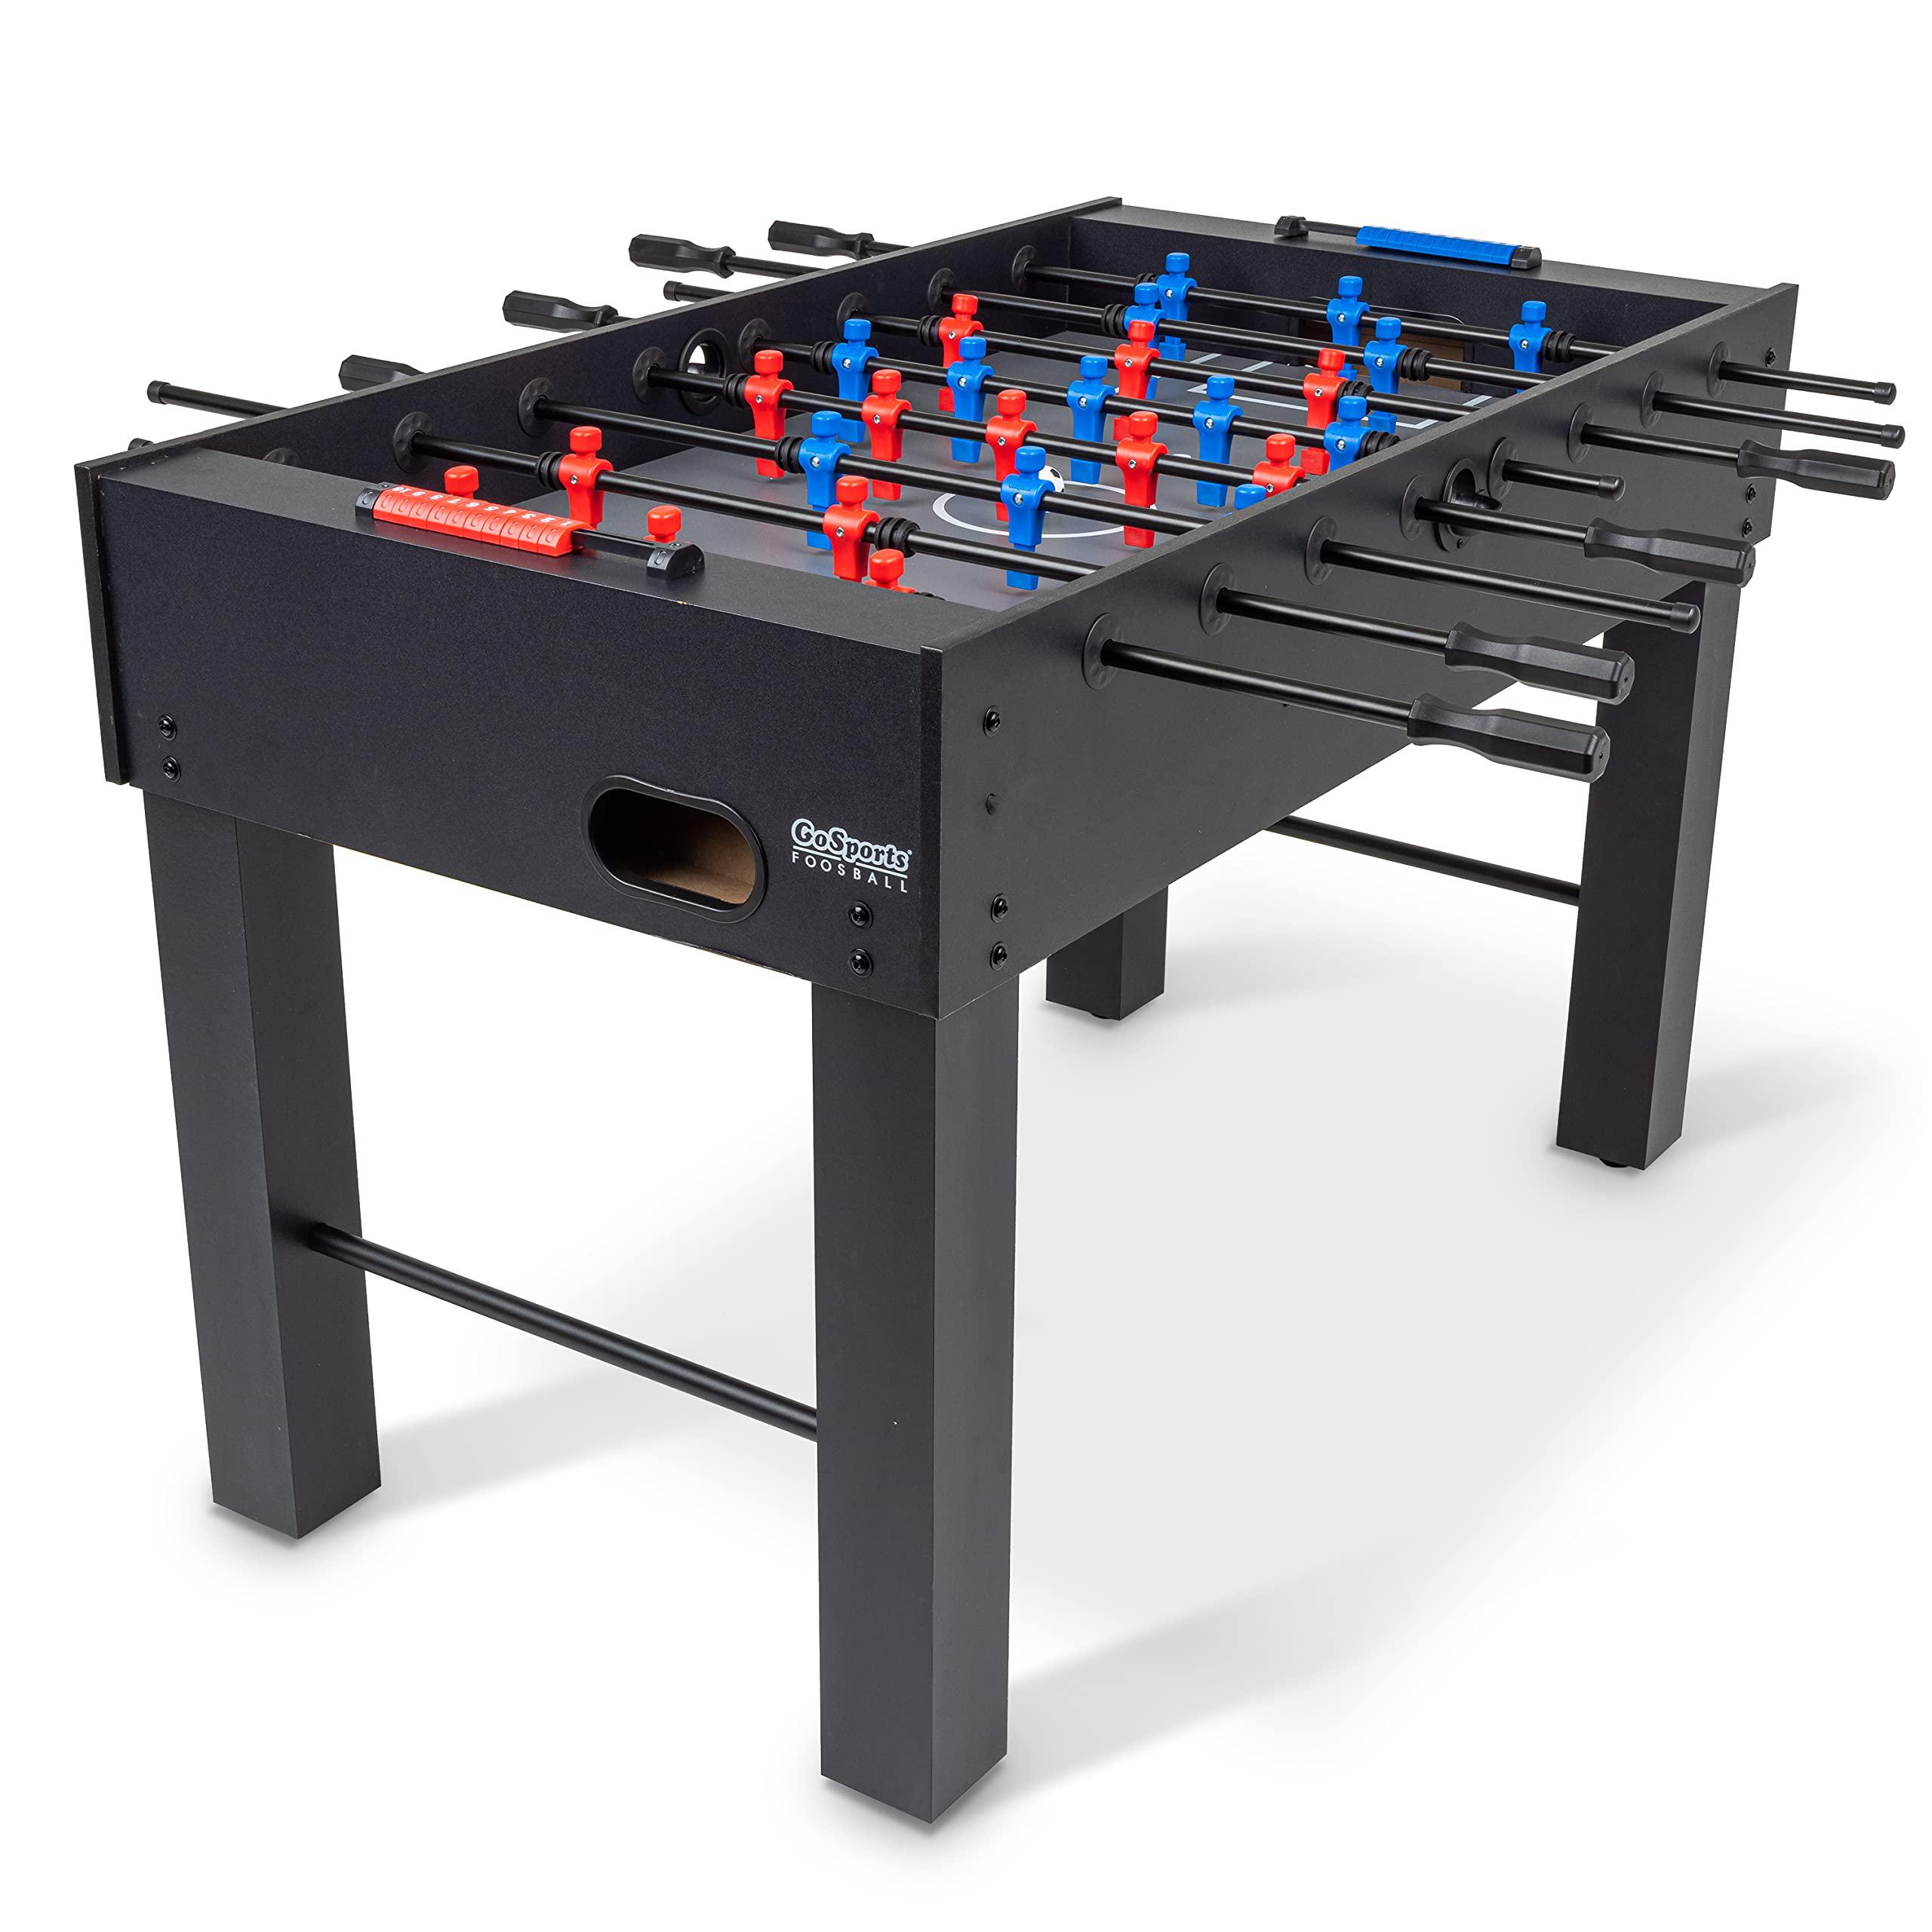 gosports 54 inch full size foosball table - black finish - includes 4 balls and 2 cup holders